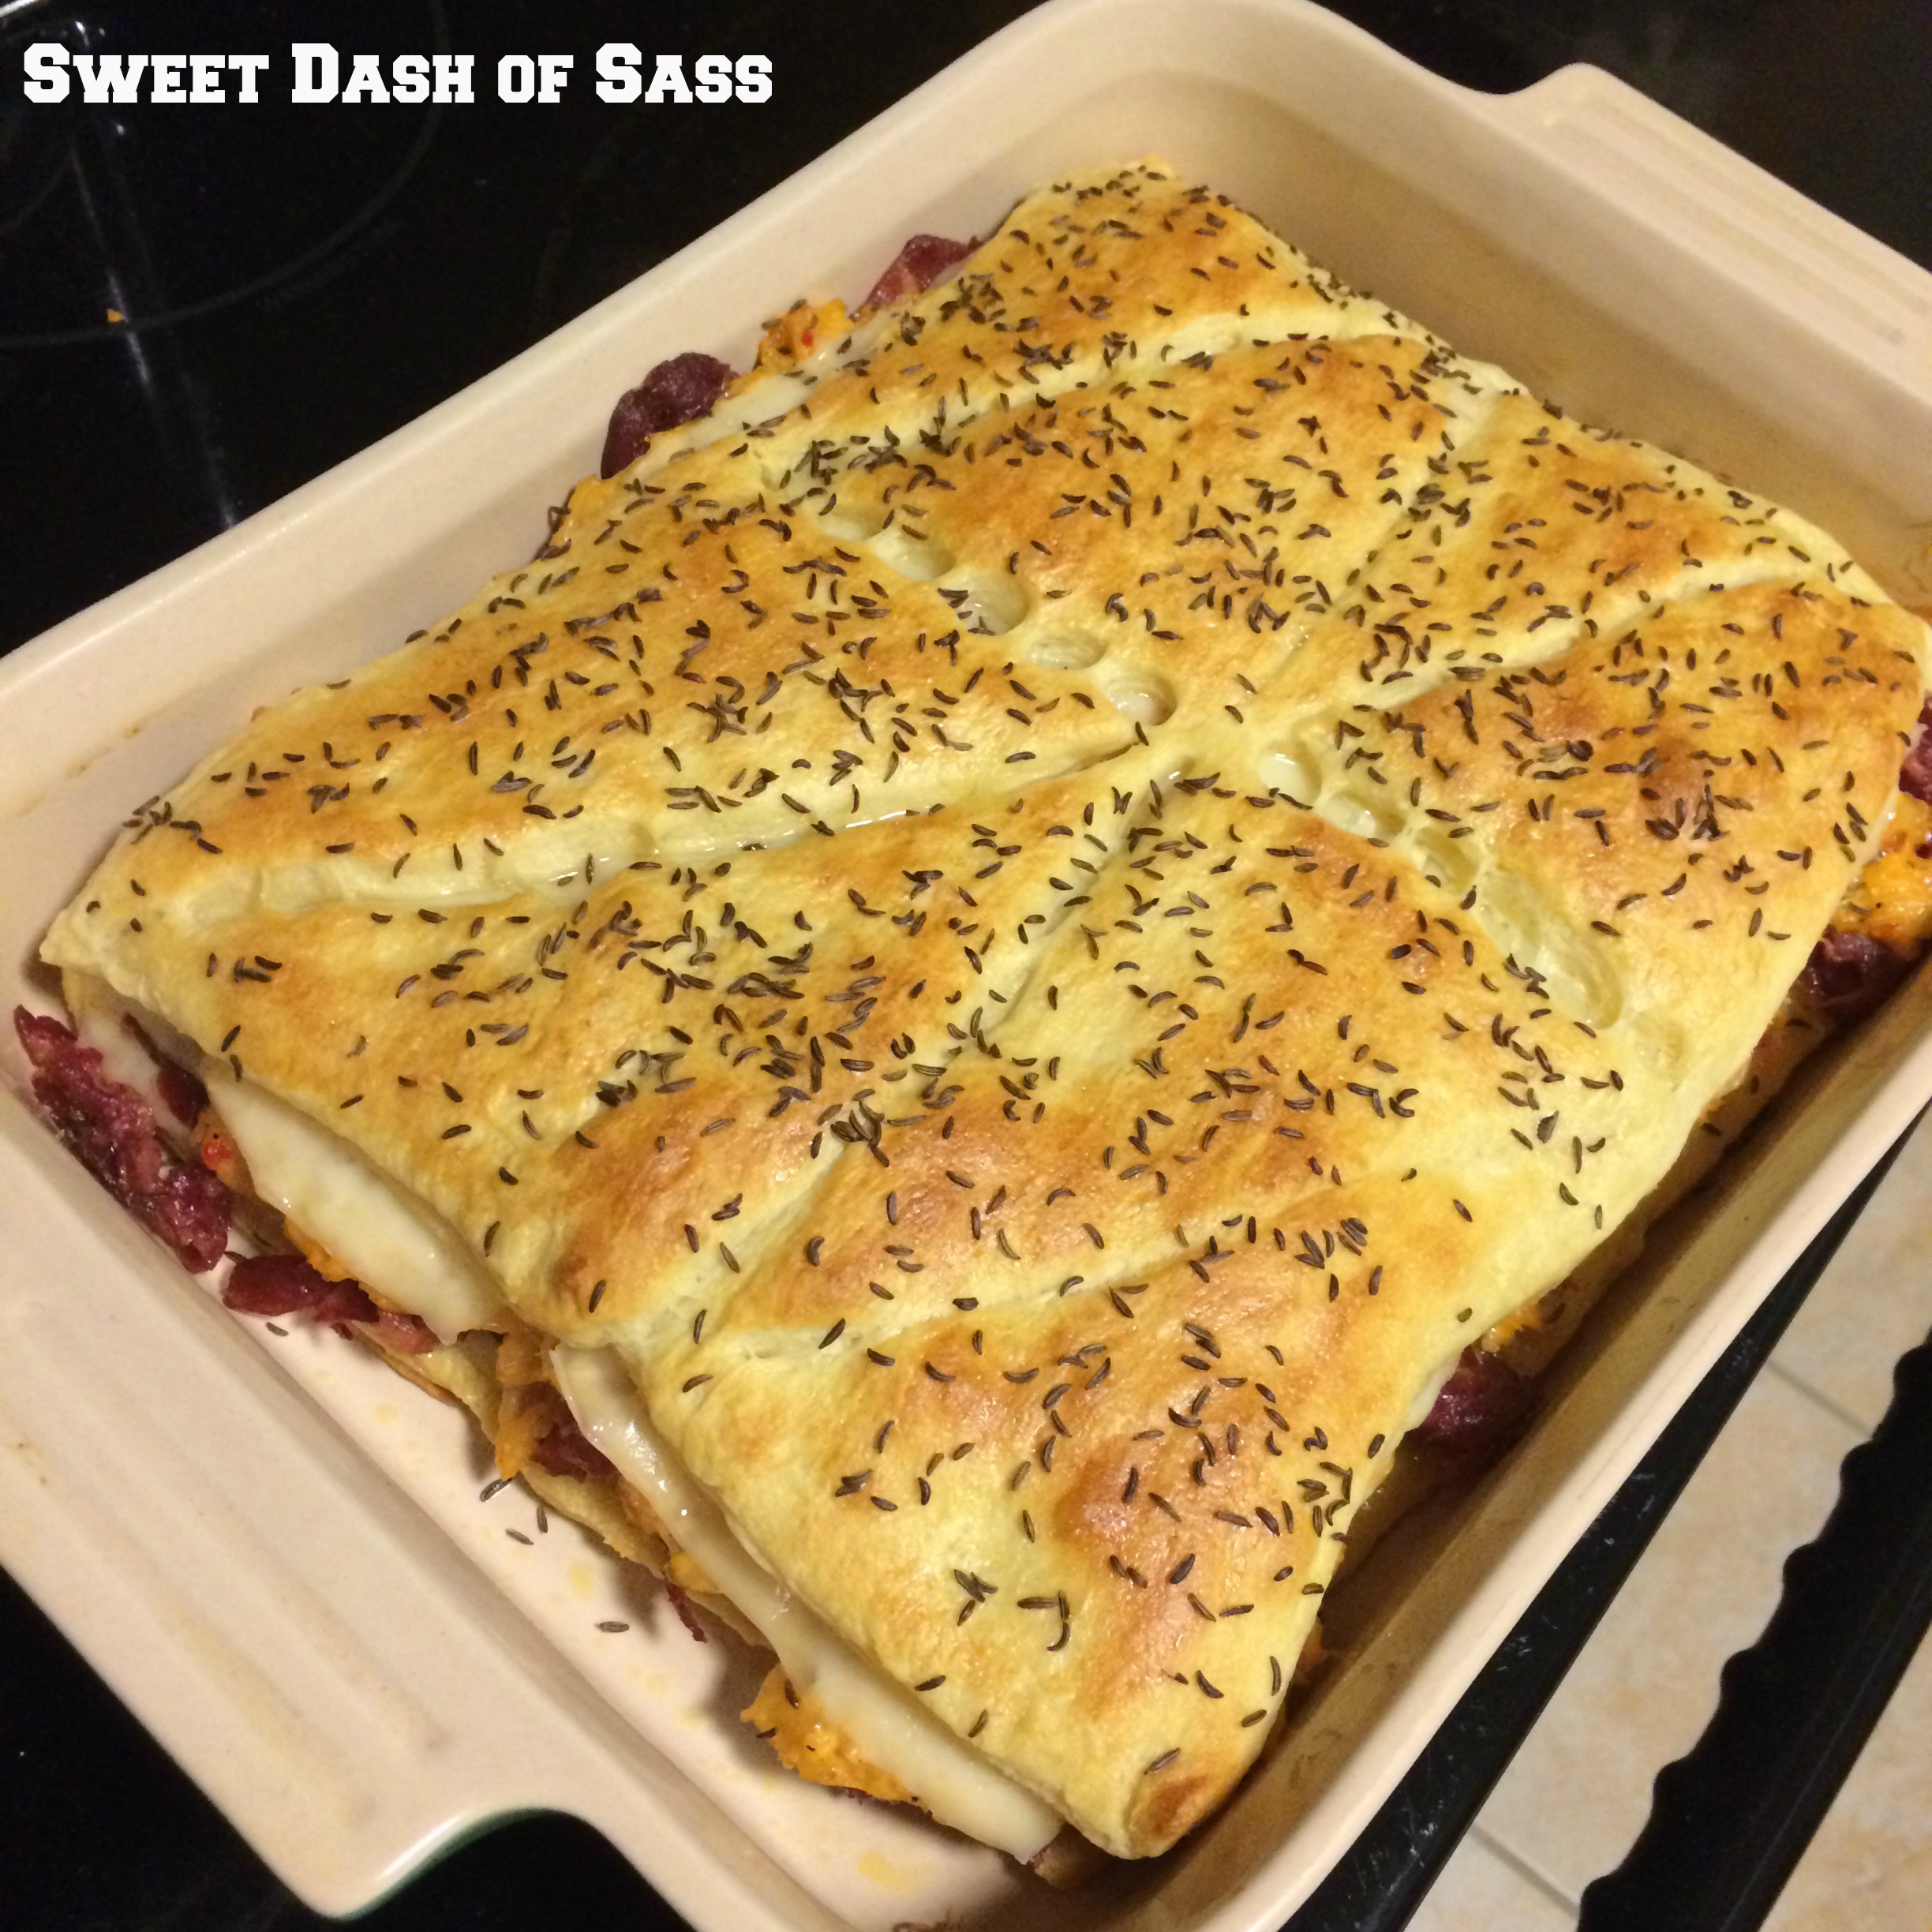 Reuben Crecent Sandwich Bake - www.SweetDashofSass.com  -- If you are a fan of Reubens, you will love this meal!!!